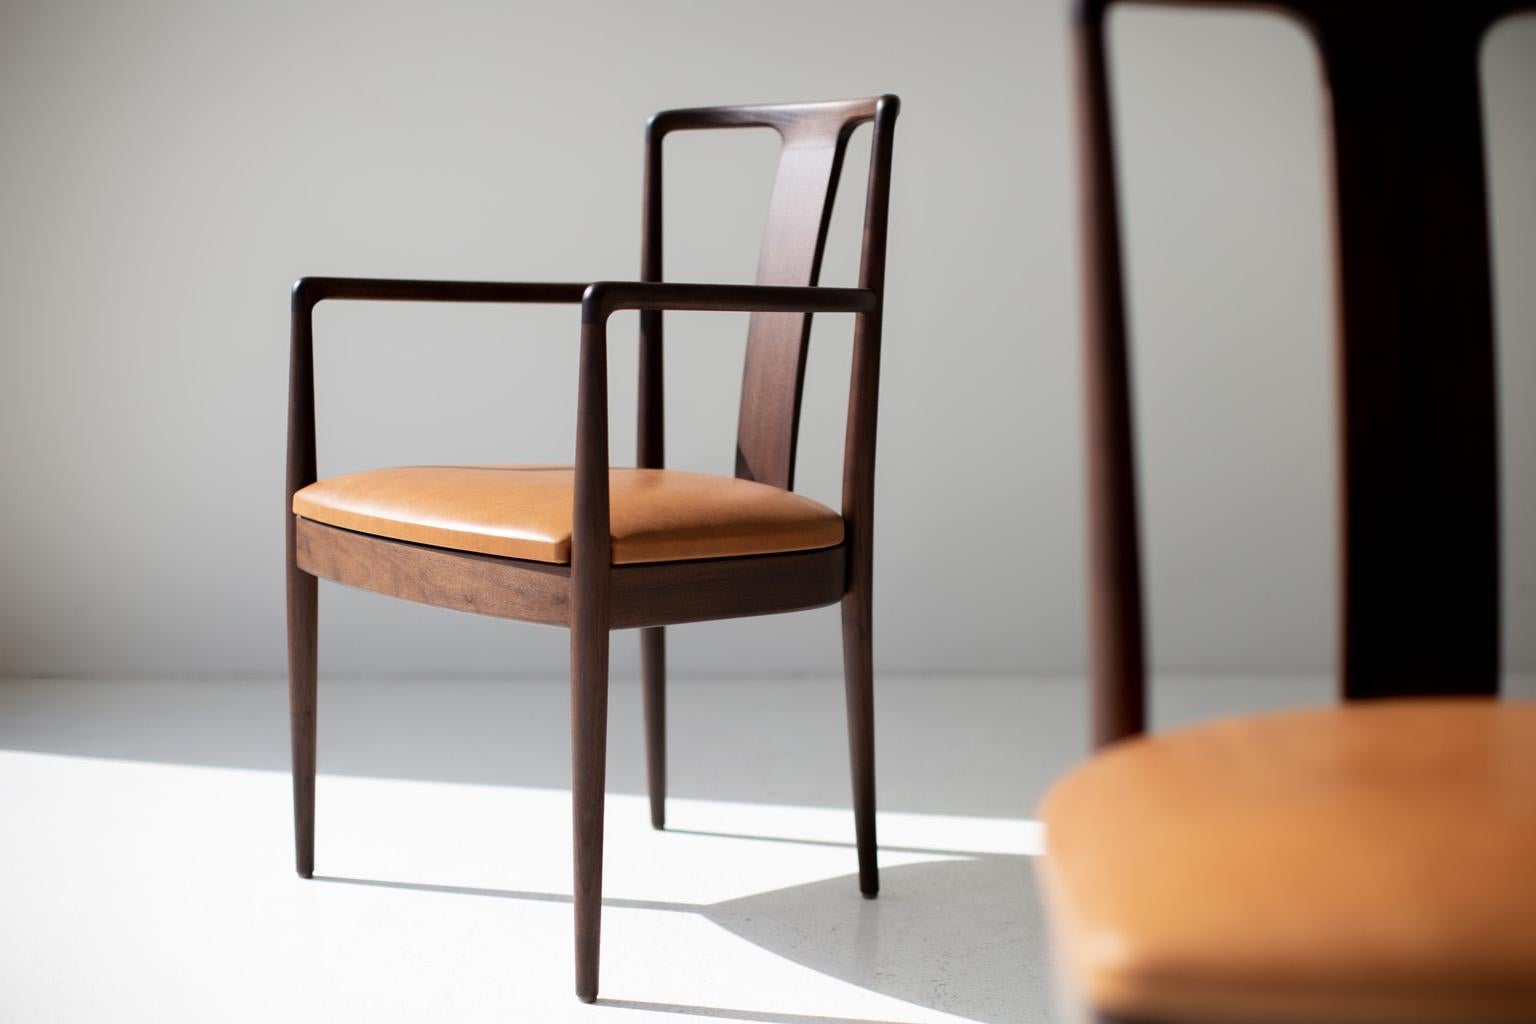 CraftAssociates Dining Chairs, Derby Modern Dining Chairs, Walnut, Brown Leather

These modern walnut dining chairs by Lawrence Peabody : The Derby Modern Dining Chair for Craft Associates Furniture are expertly hand crafted and upholstered with